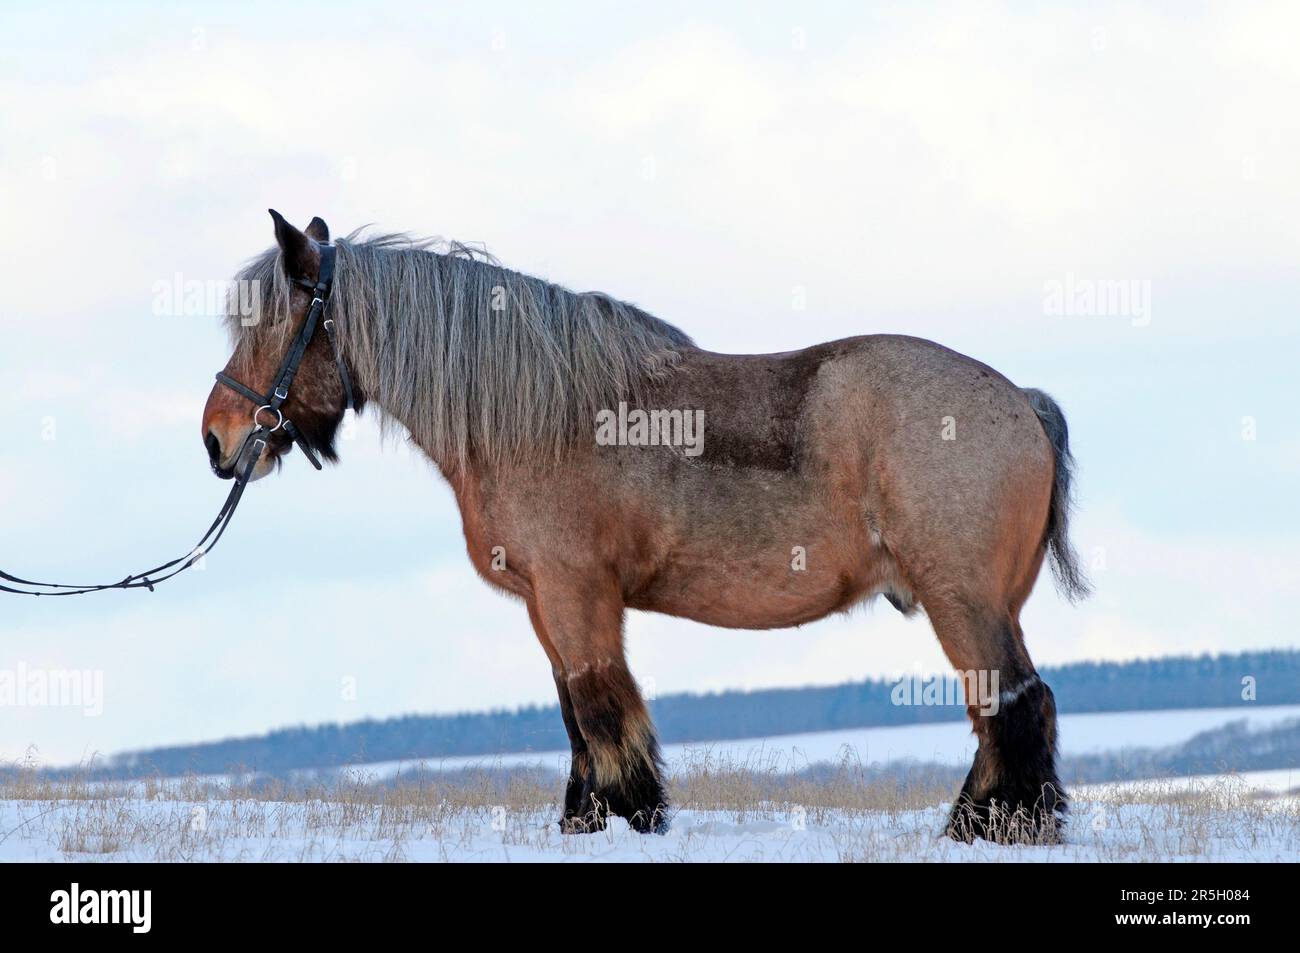 Belgian cold-blood, gelding, cold-blooded horse, Brabanter, spiked hair, tail docked, lateral Stock Photo